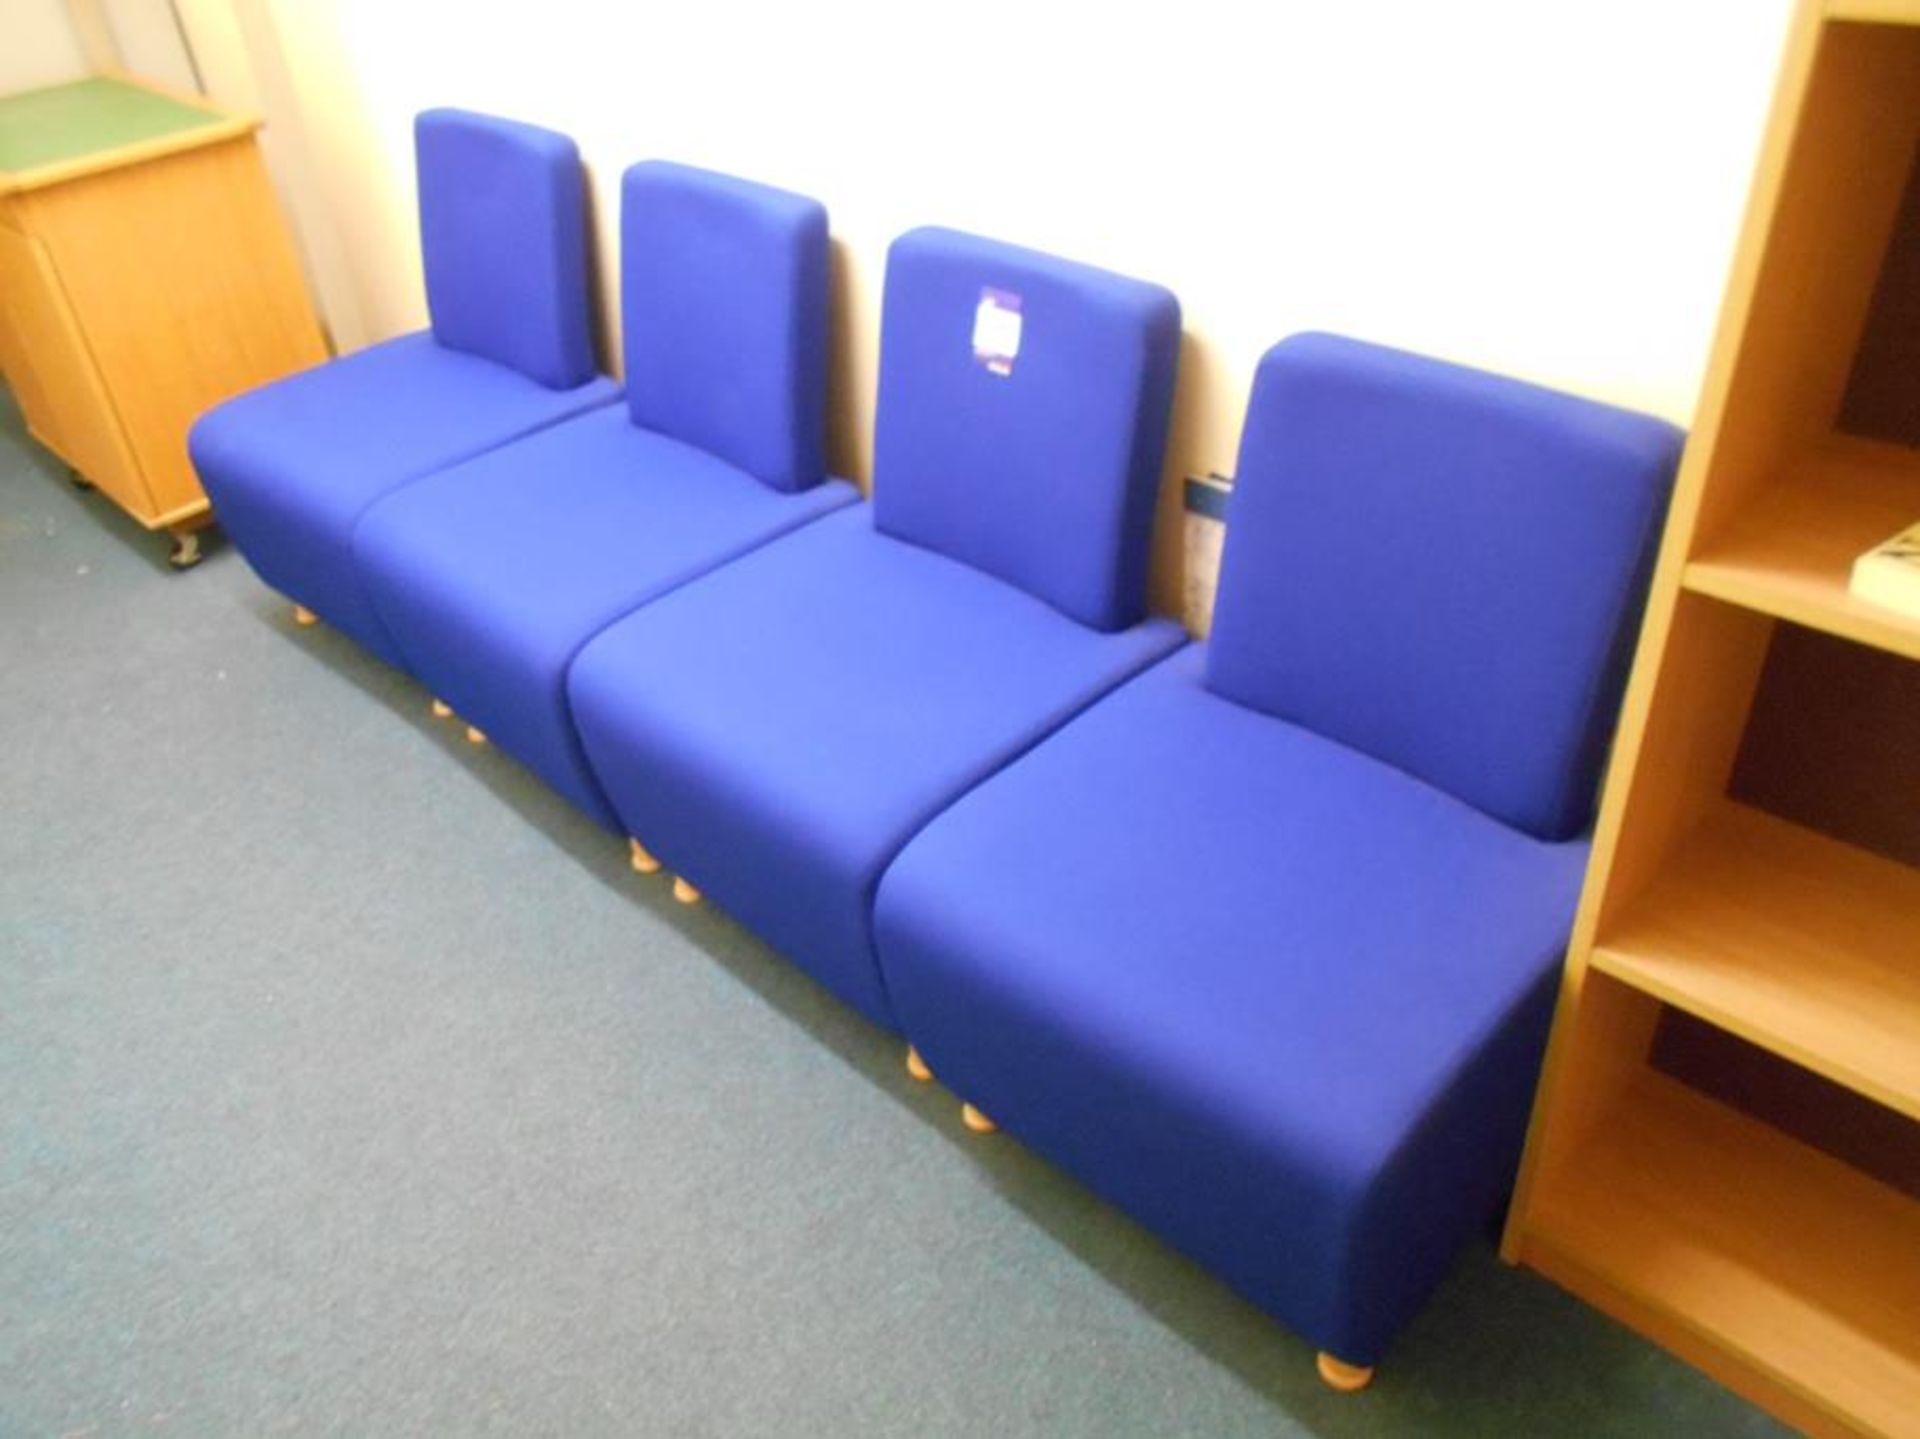 * 4 Upholstered Waiting Room Chairs Photographs are provided for example purposes only and do not